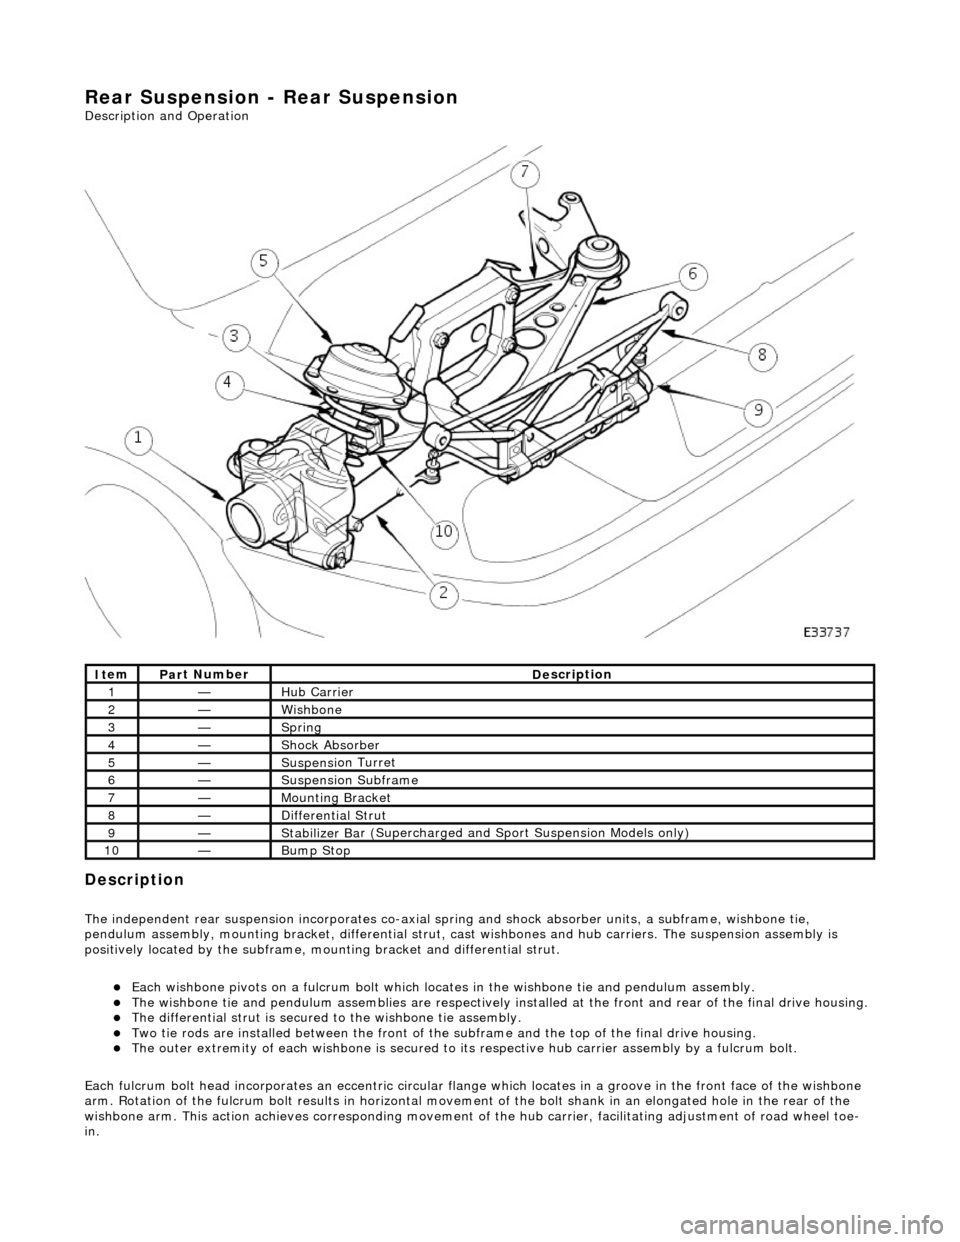 JAGUAR X308 1998 2.G Workshop Manual Rear
 Suspension - Rear Suspension 
Description an
 d Operation 
 
Description 
The i
ndependent rear suspension incorporates co-axial sp
ring and shock absorber units, a subframe, wishbone tie, 
pend